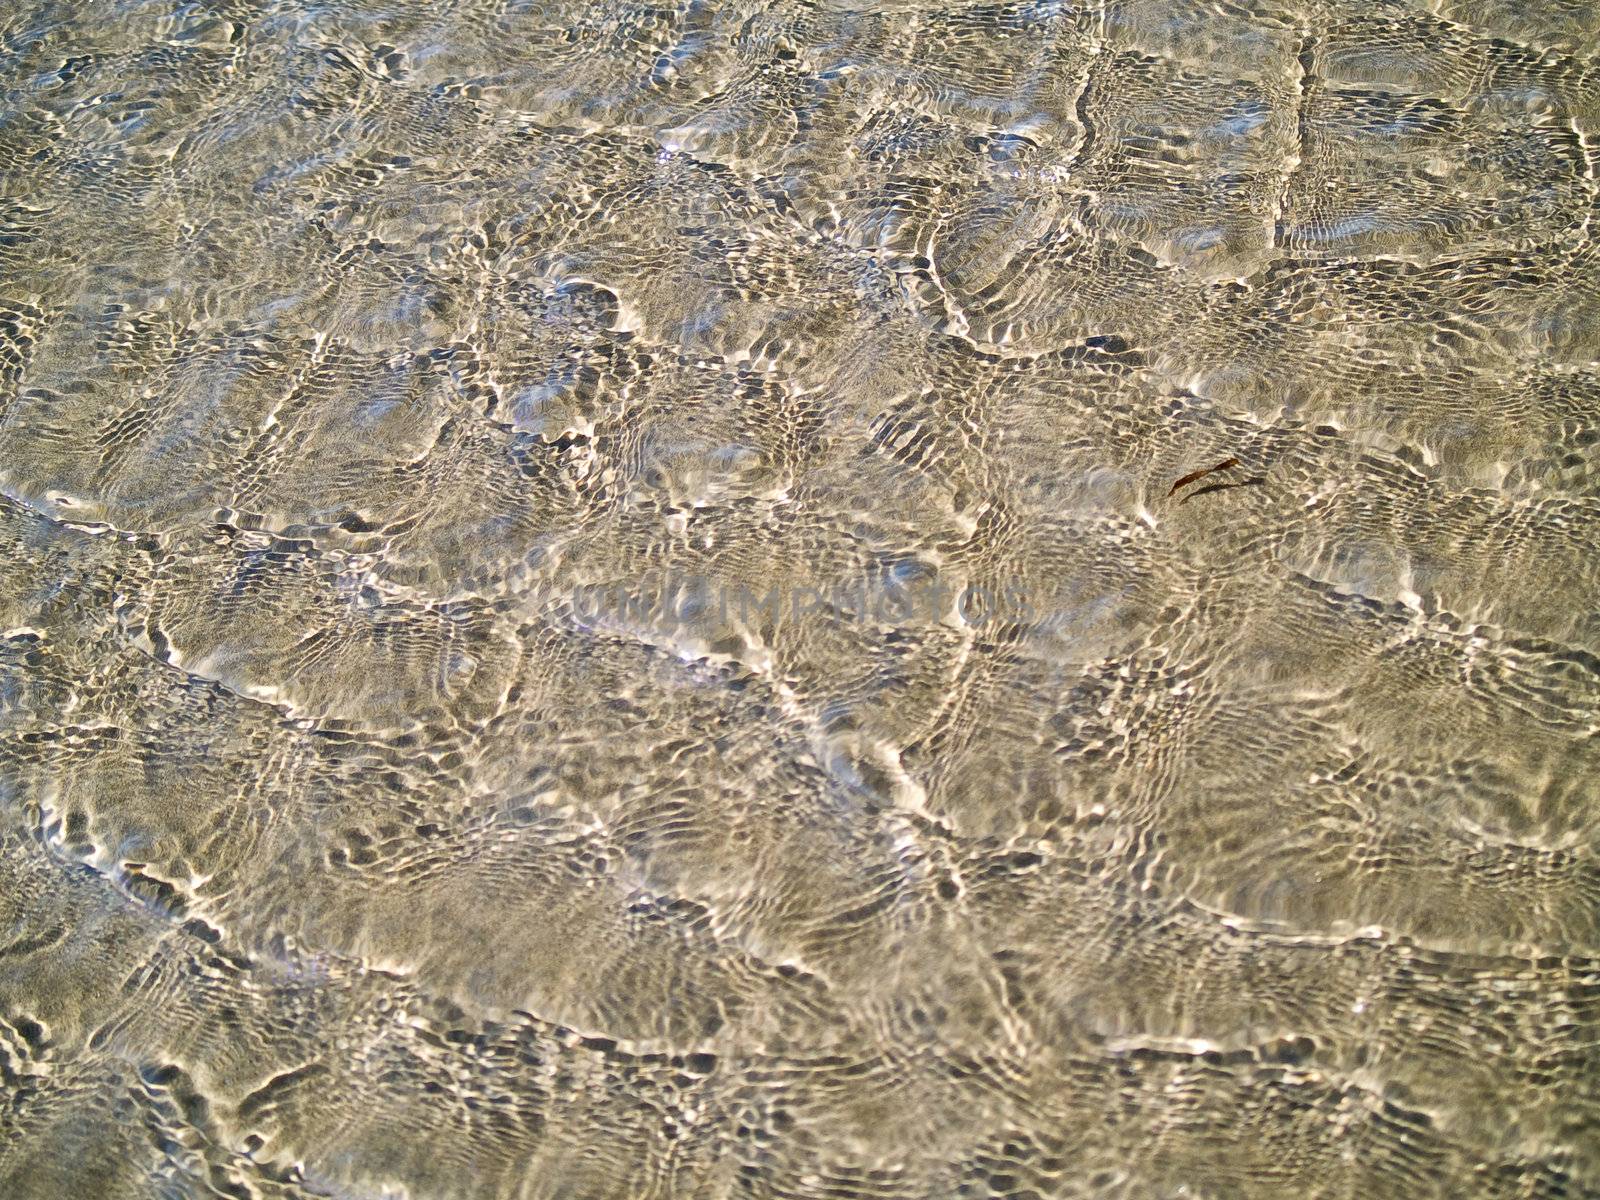 Ocean Ripples in Shallow Water on a Beach